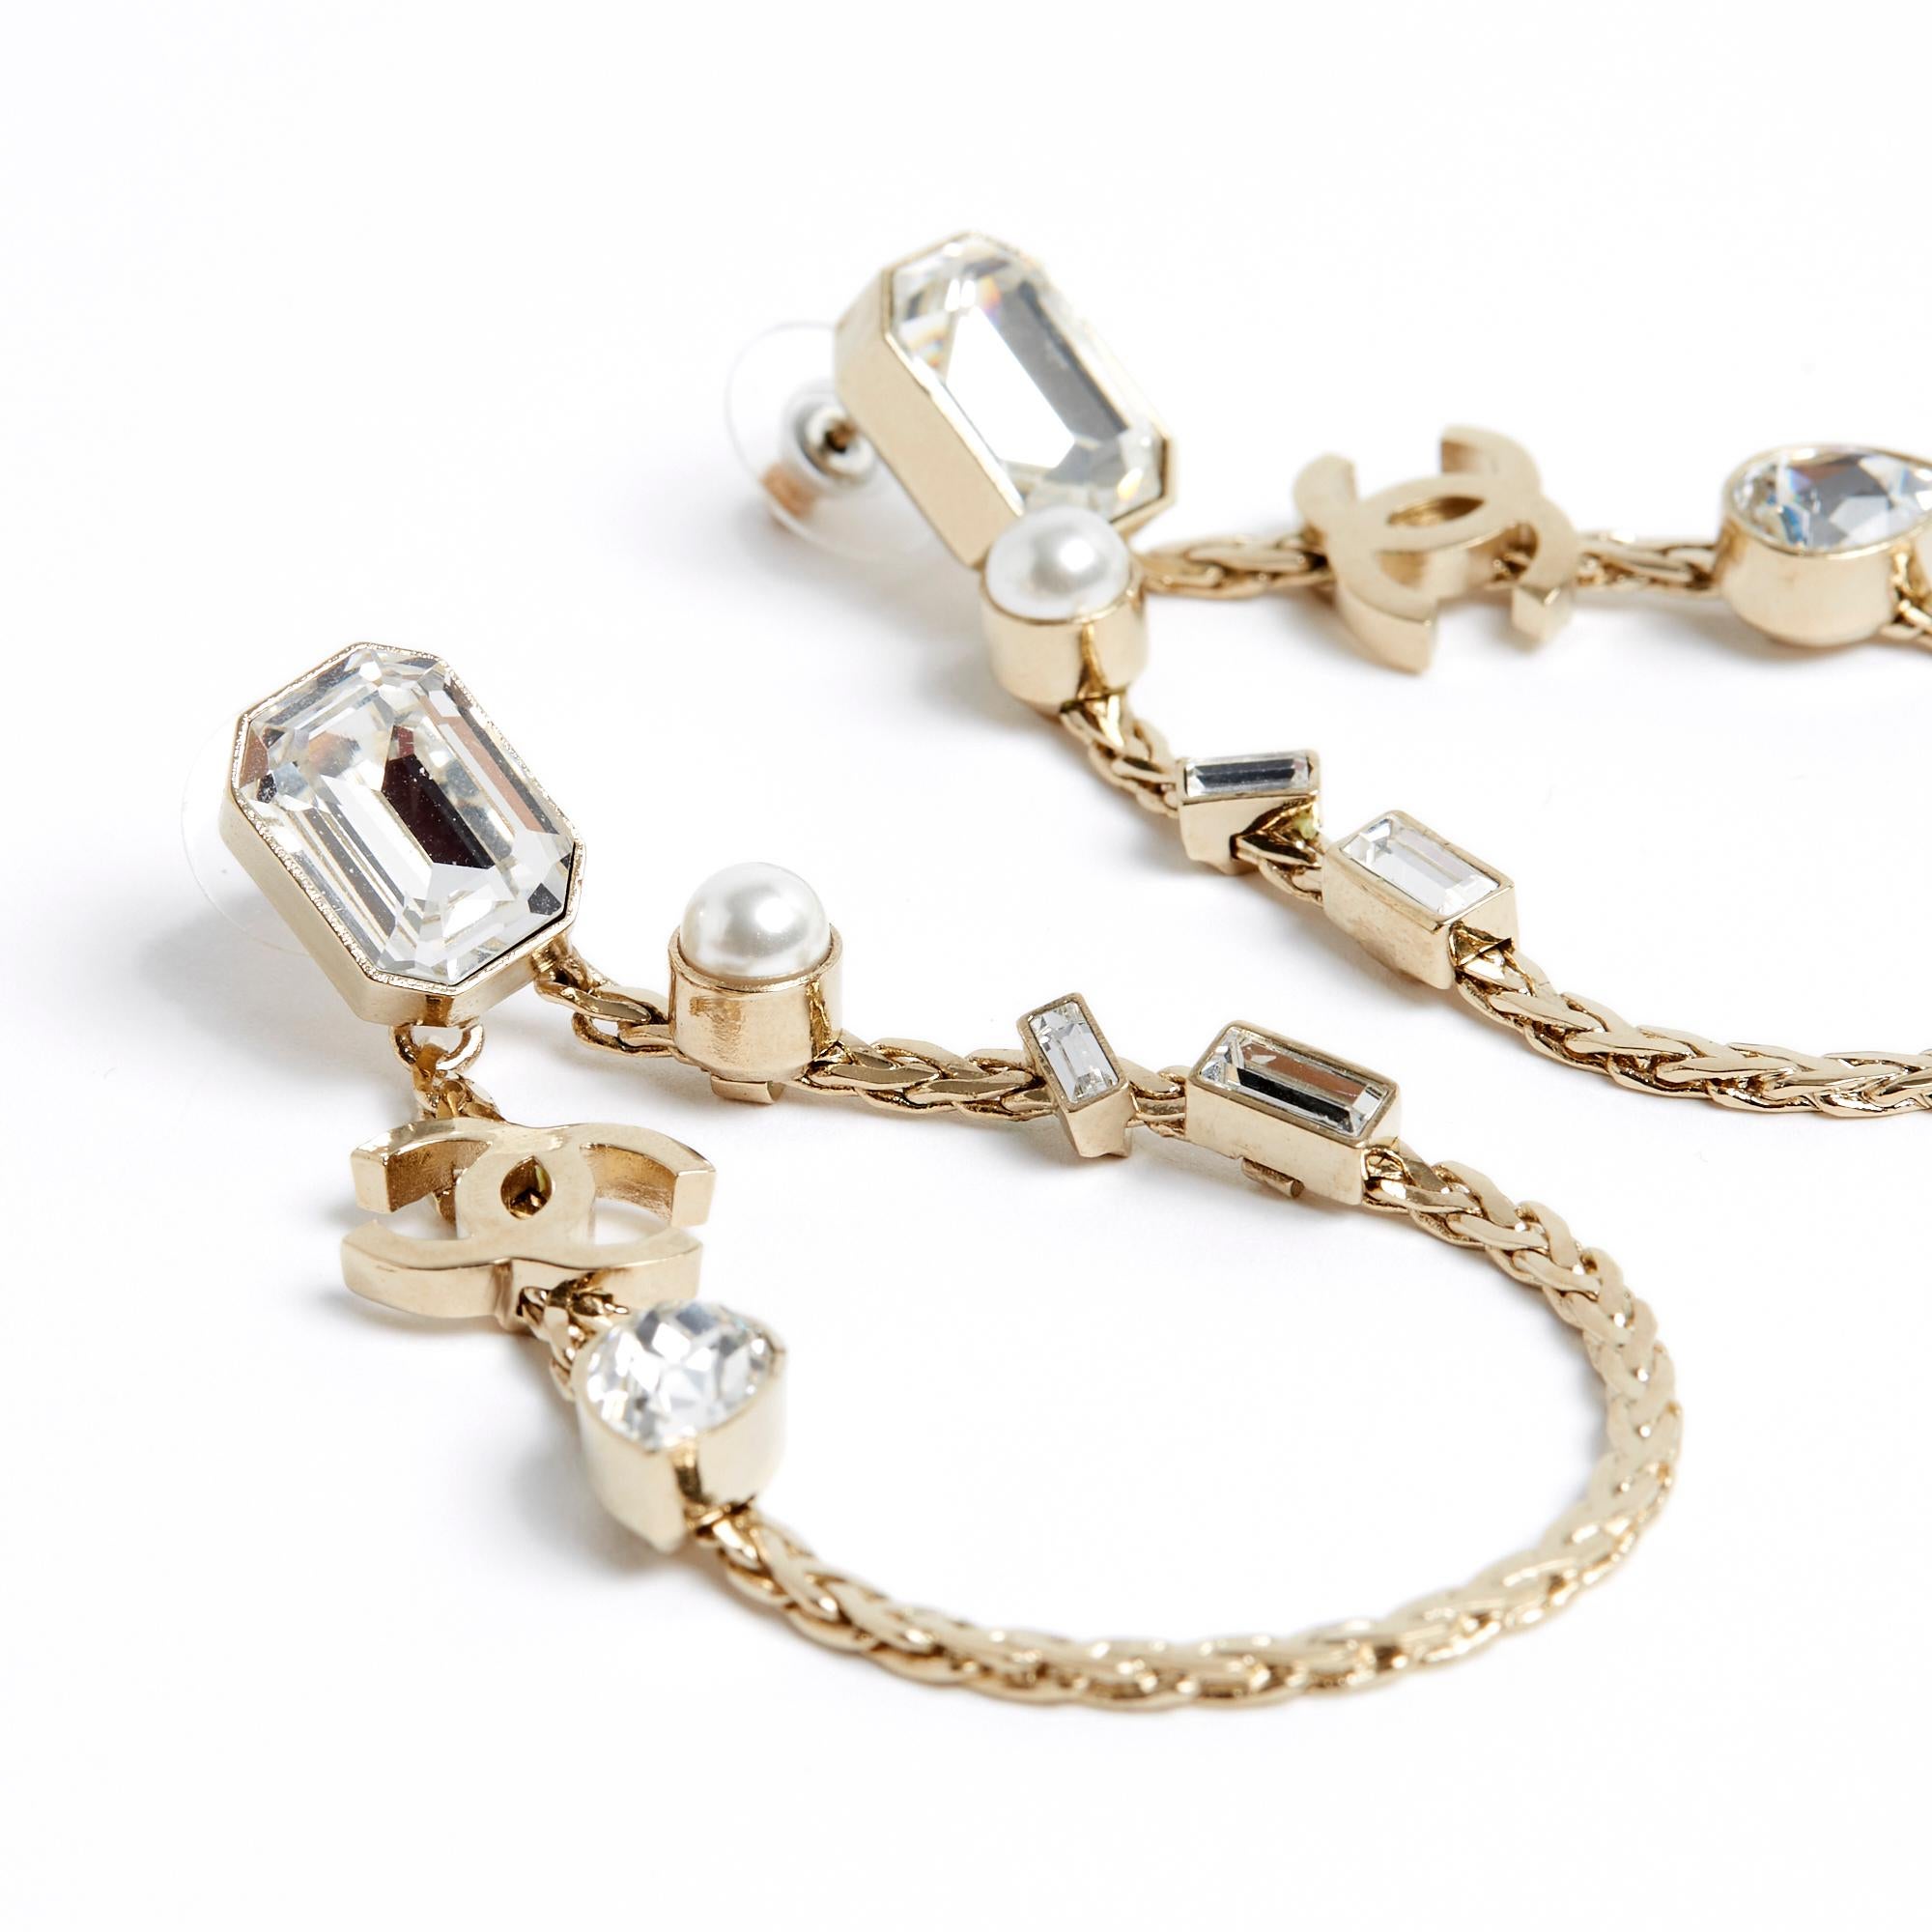 Chanel earrings from the SS2022 collection in lightly golden metal, composed of a stud encrusted with a large emerald-cut white rhinestone and a large flat chain buckle inlaid with rhinestones and fancy pearl and a CC symbol. Total height of the